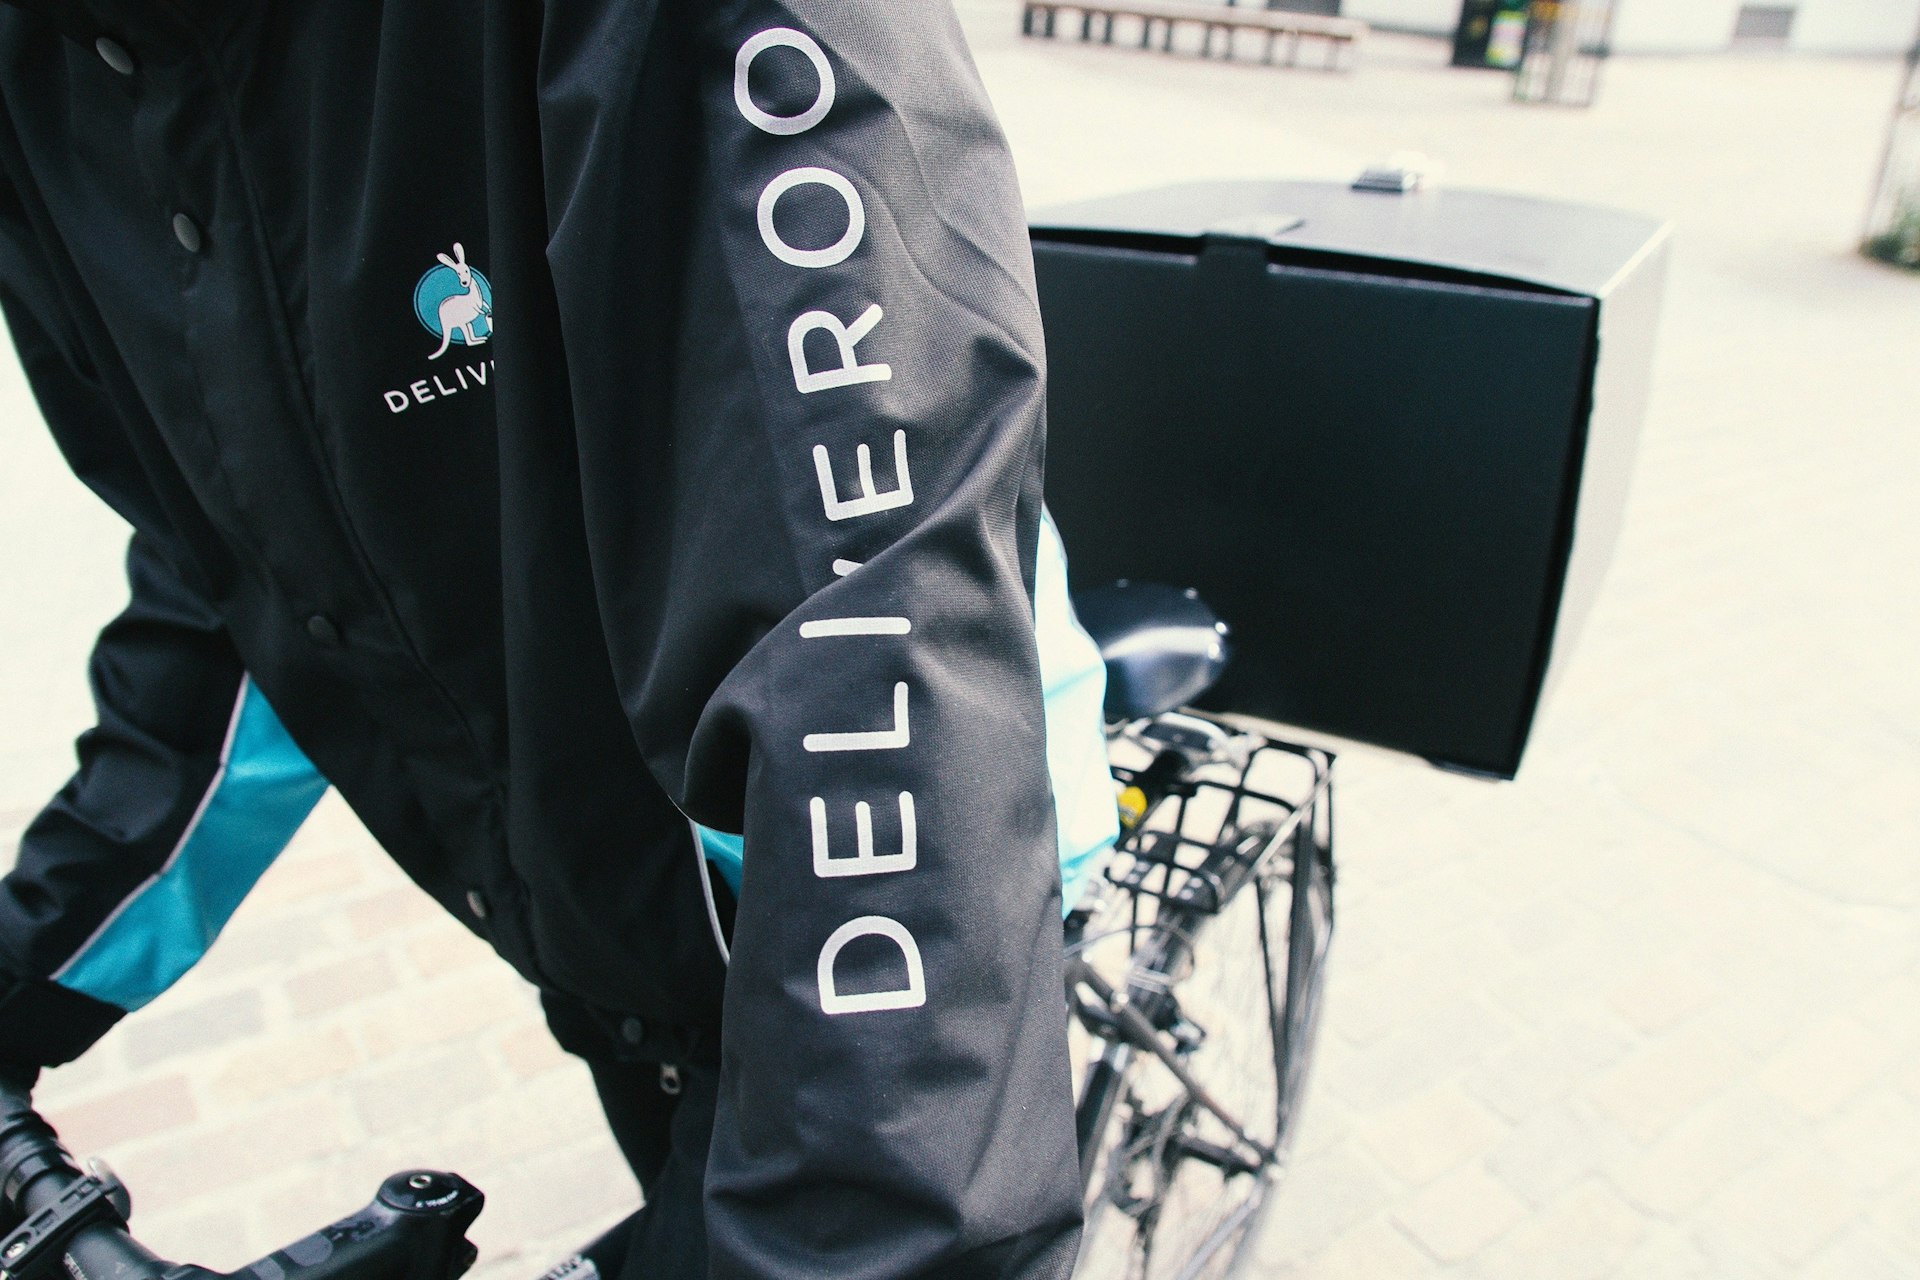 I worked as a Deliveroo rider and trust me, we all must support their strike